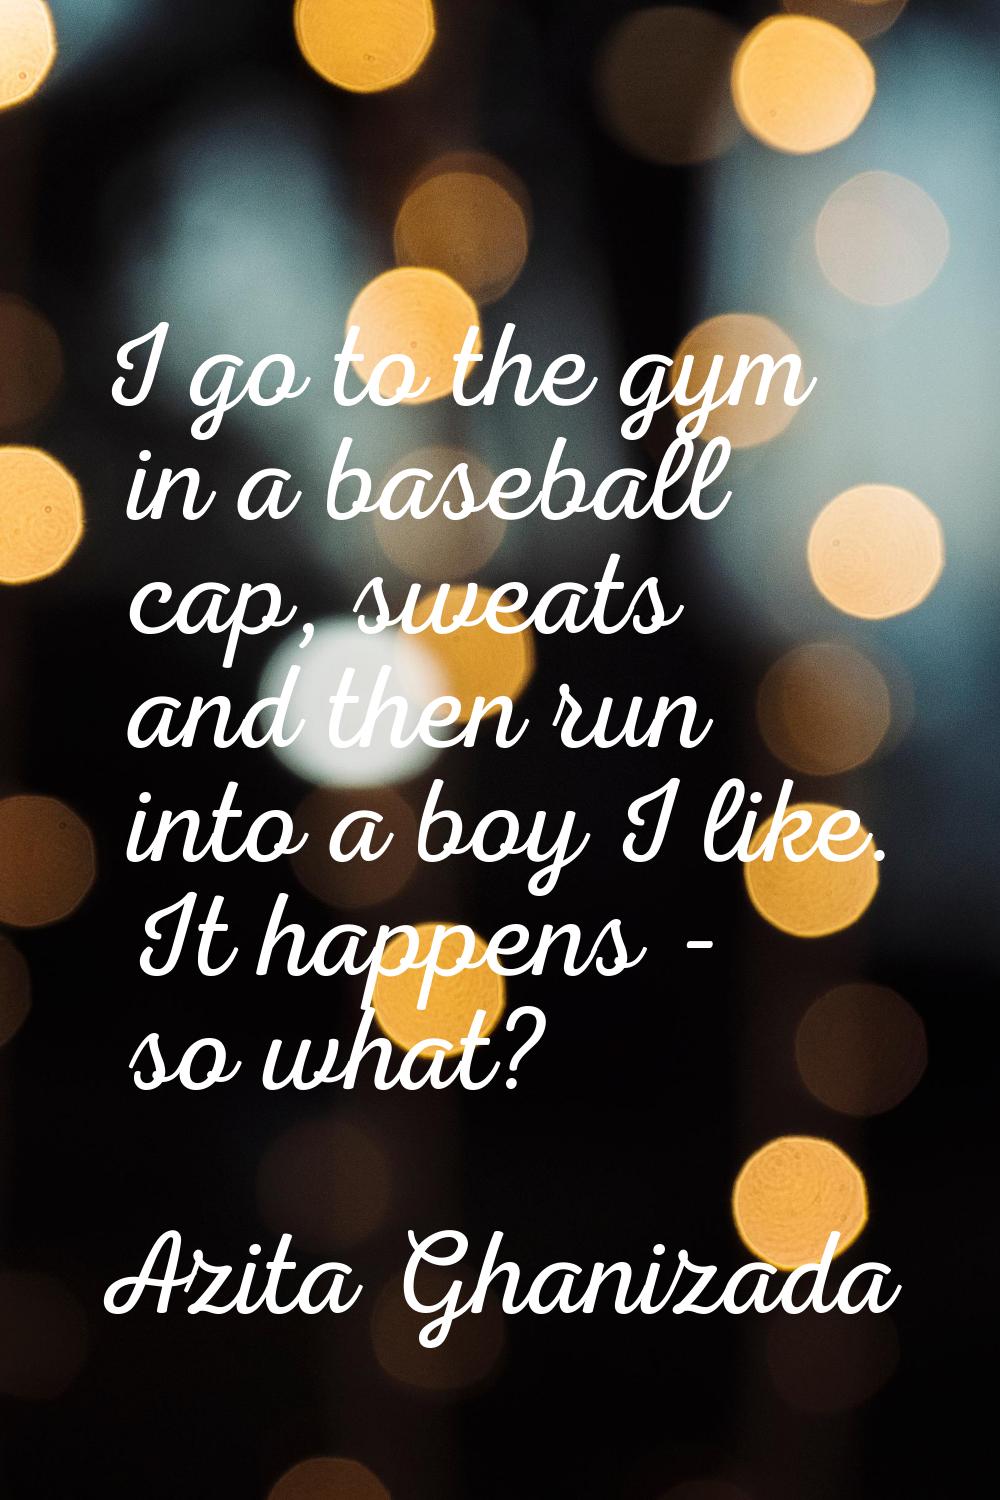 I go to the gym in a baseball cap, sweats and then run into a boy I like. It happens - so what?